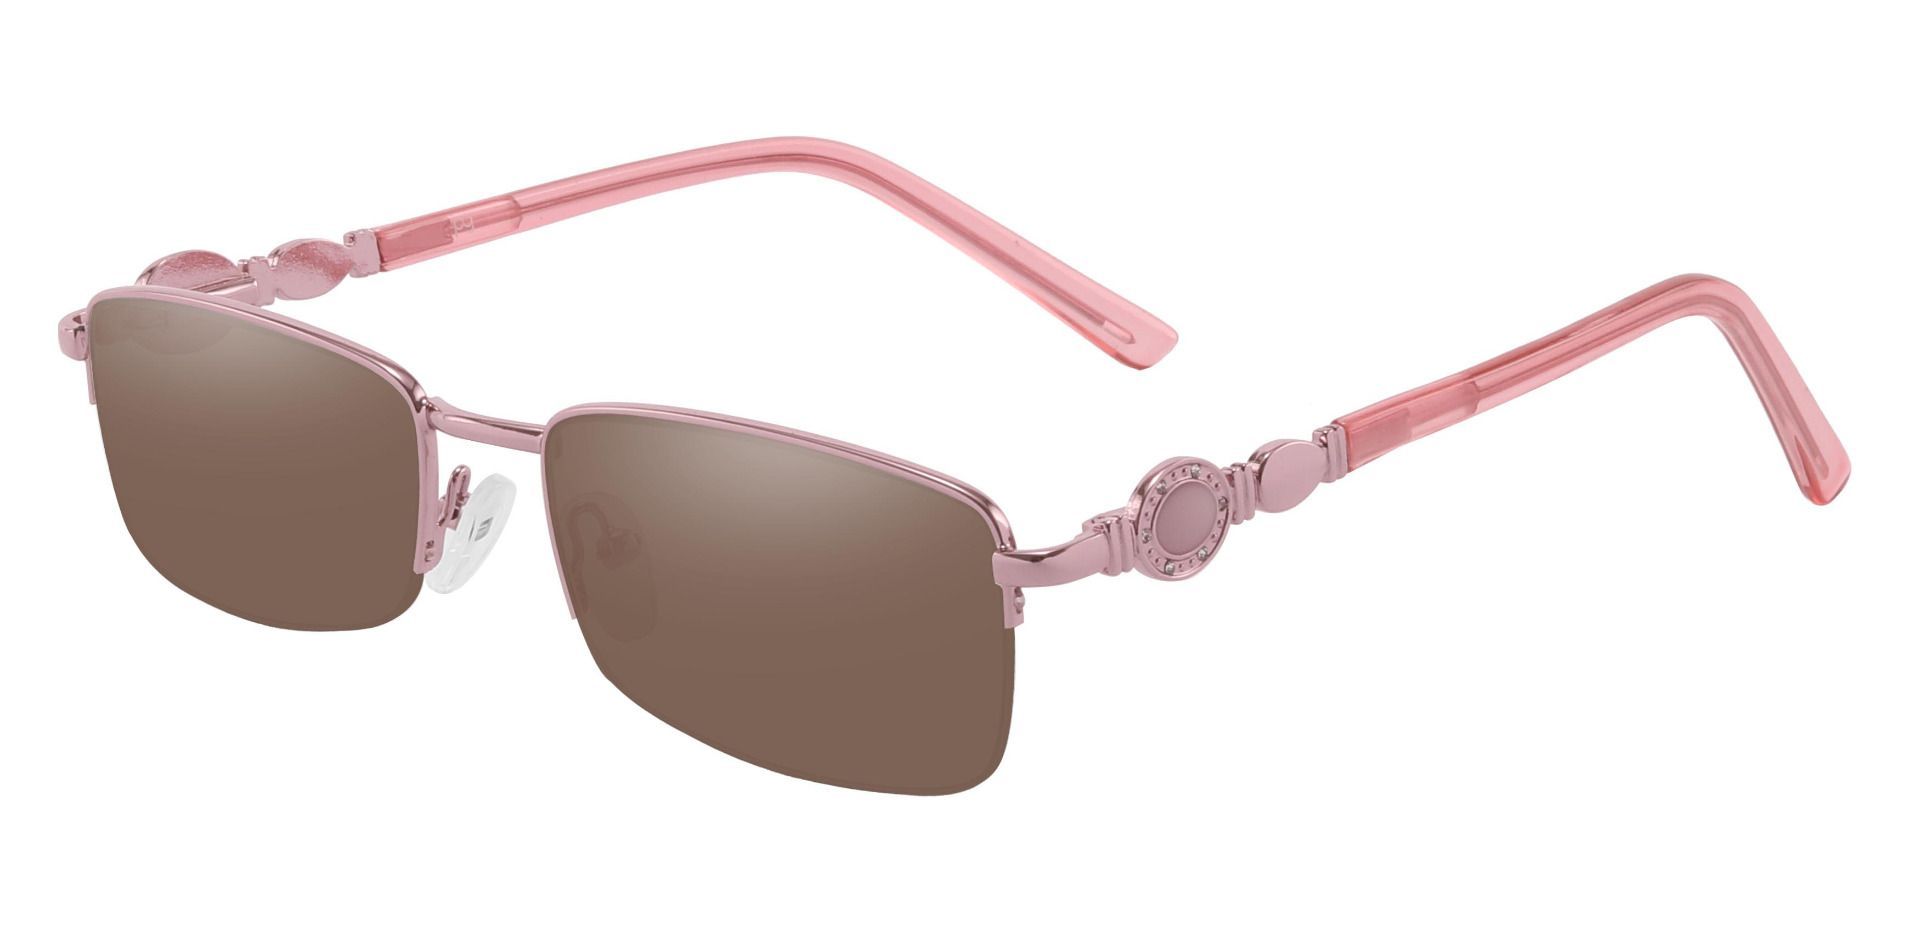 Crowley Rectangle Prescription Sunglasses - Pink Frame With Brown Lenses